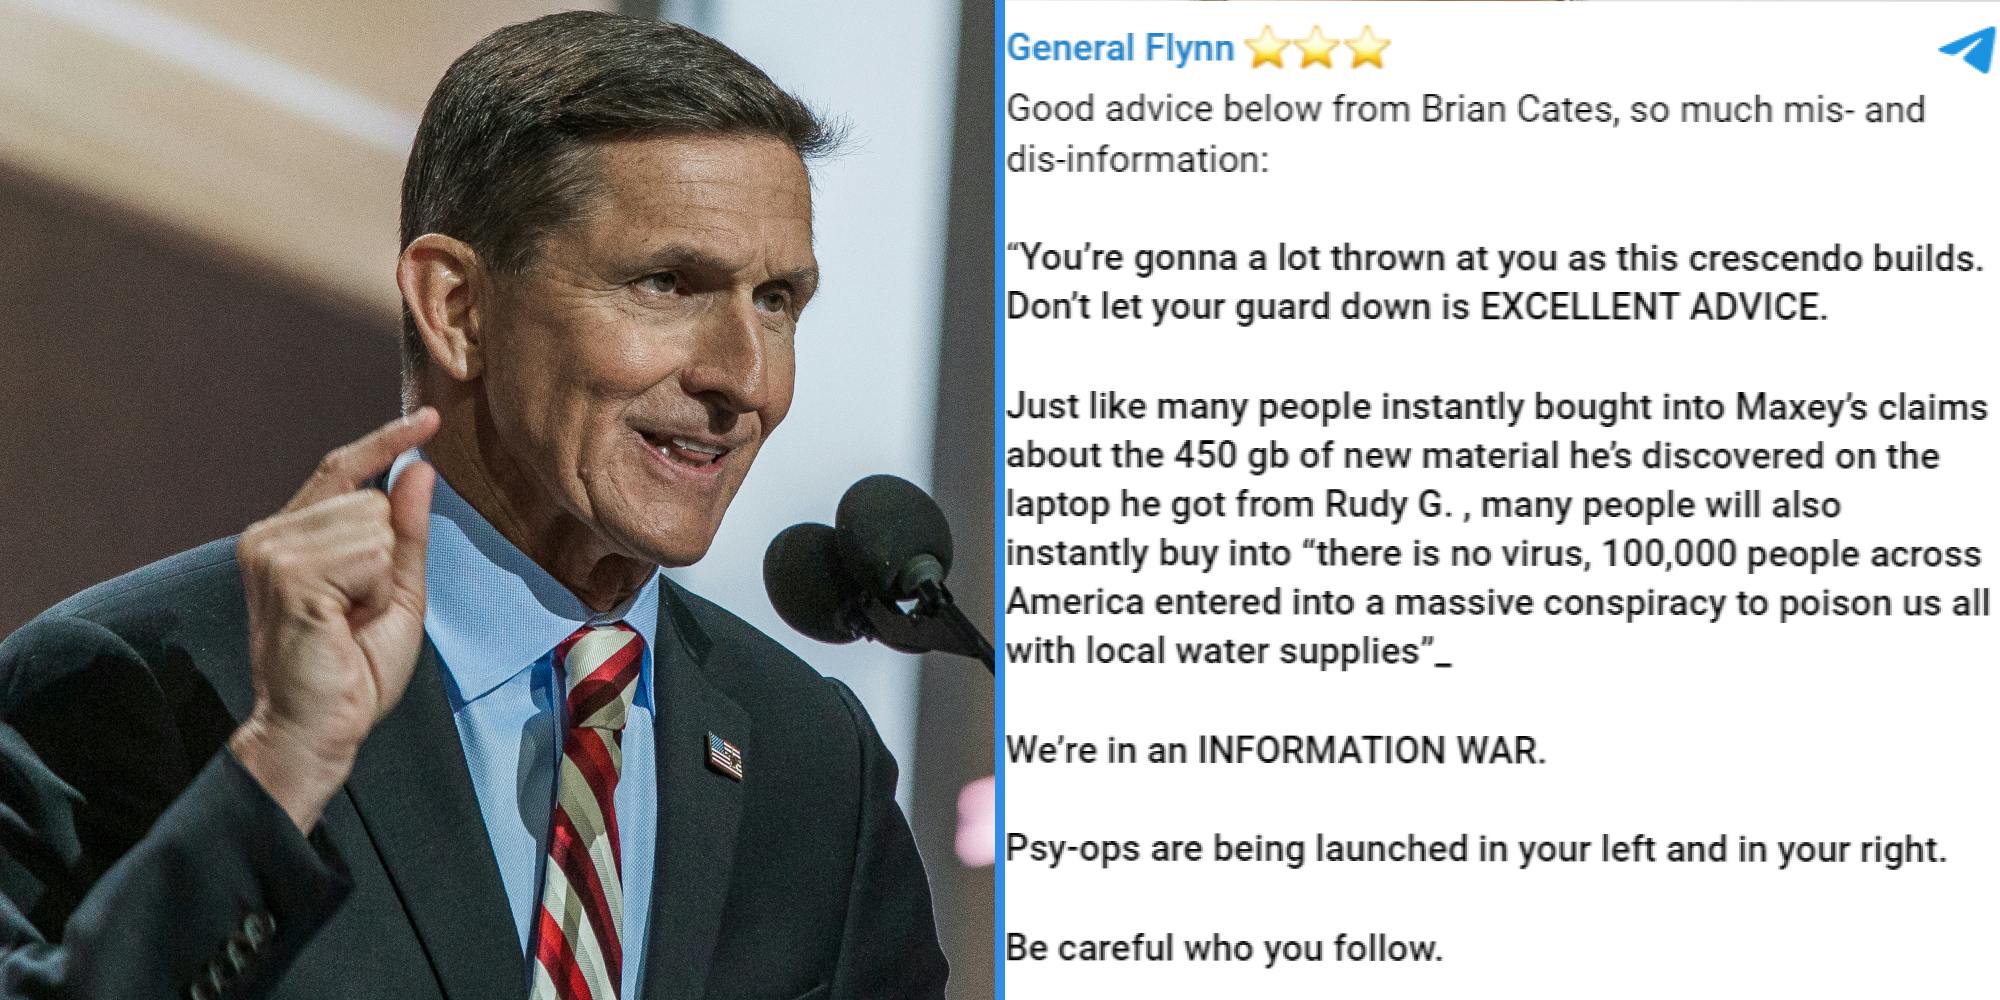 General Michael Flynn (l) General Flynn's Telegram message saying " "You're gonna a lot thrown at you as this crescendo builds. Don't let your guard down is EXCELLENT ADVICE Just like many people instantly bought into Maxey's claims about the 450gb of new material he's discovered on the laptop he got from Rudy G., many people will also instantly buy into "there is no virus, 100,000 people across Americs entered into a massive conspiracy tom poison us all with local water supplies" We're in an INFORMATION WAR" (r)